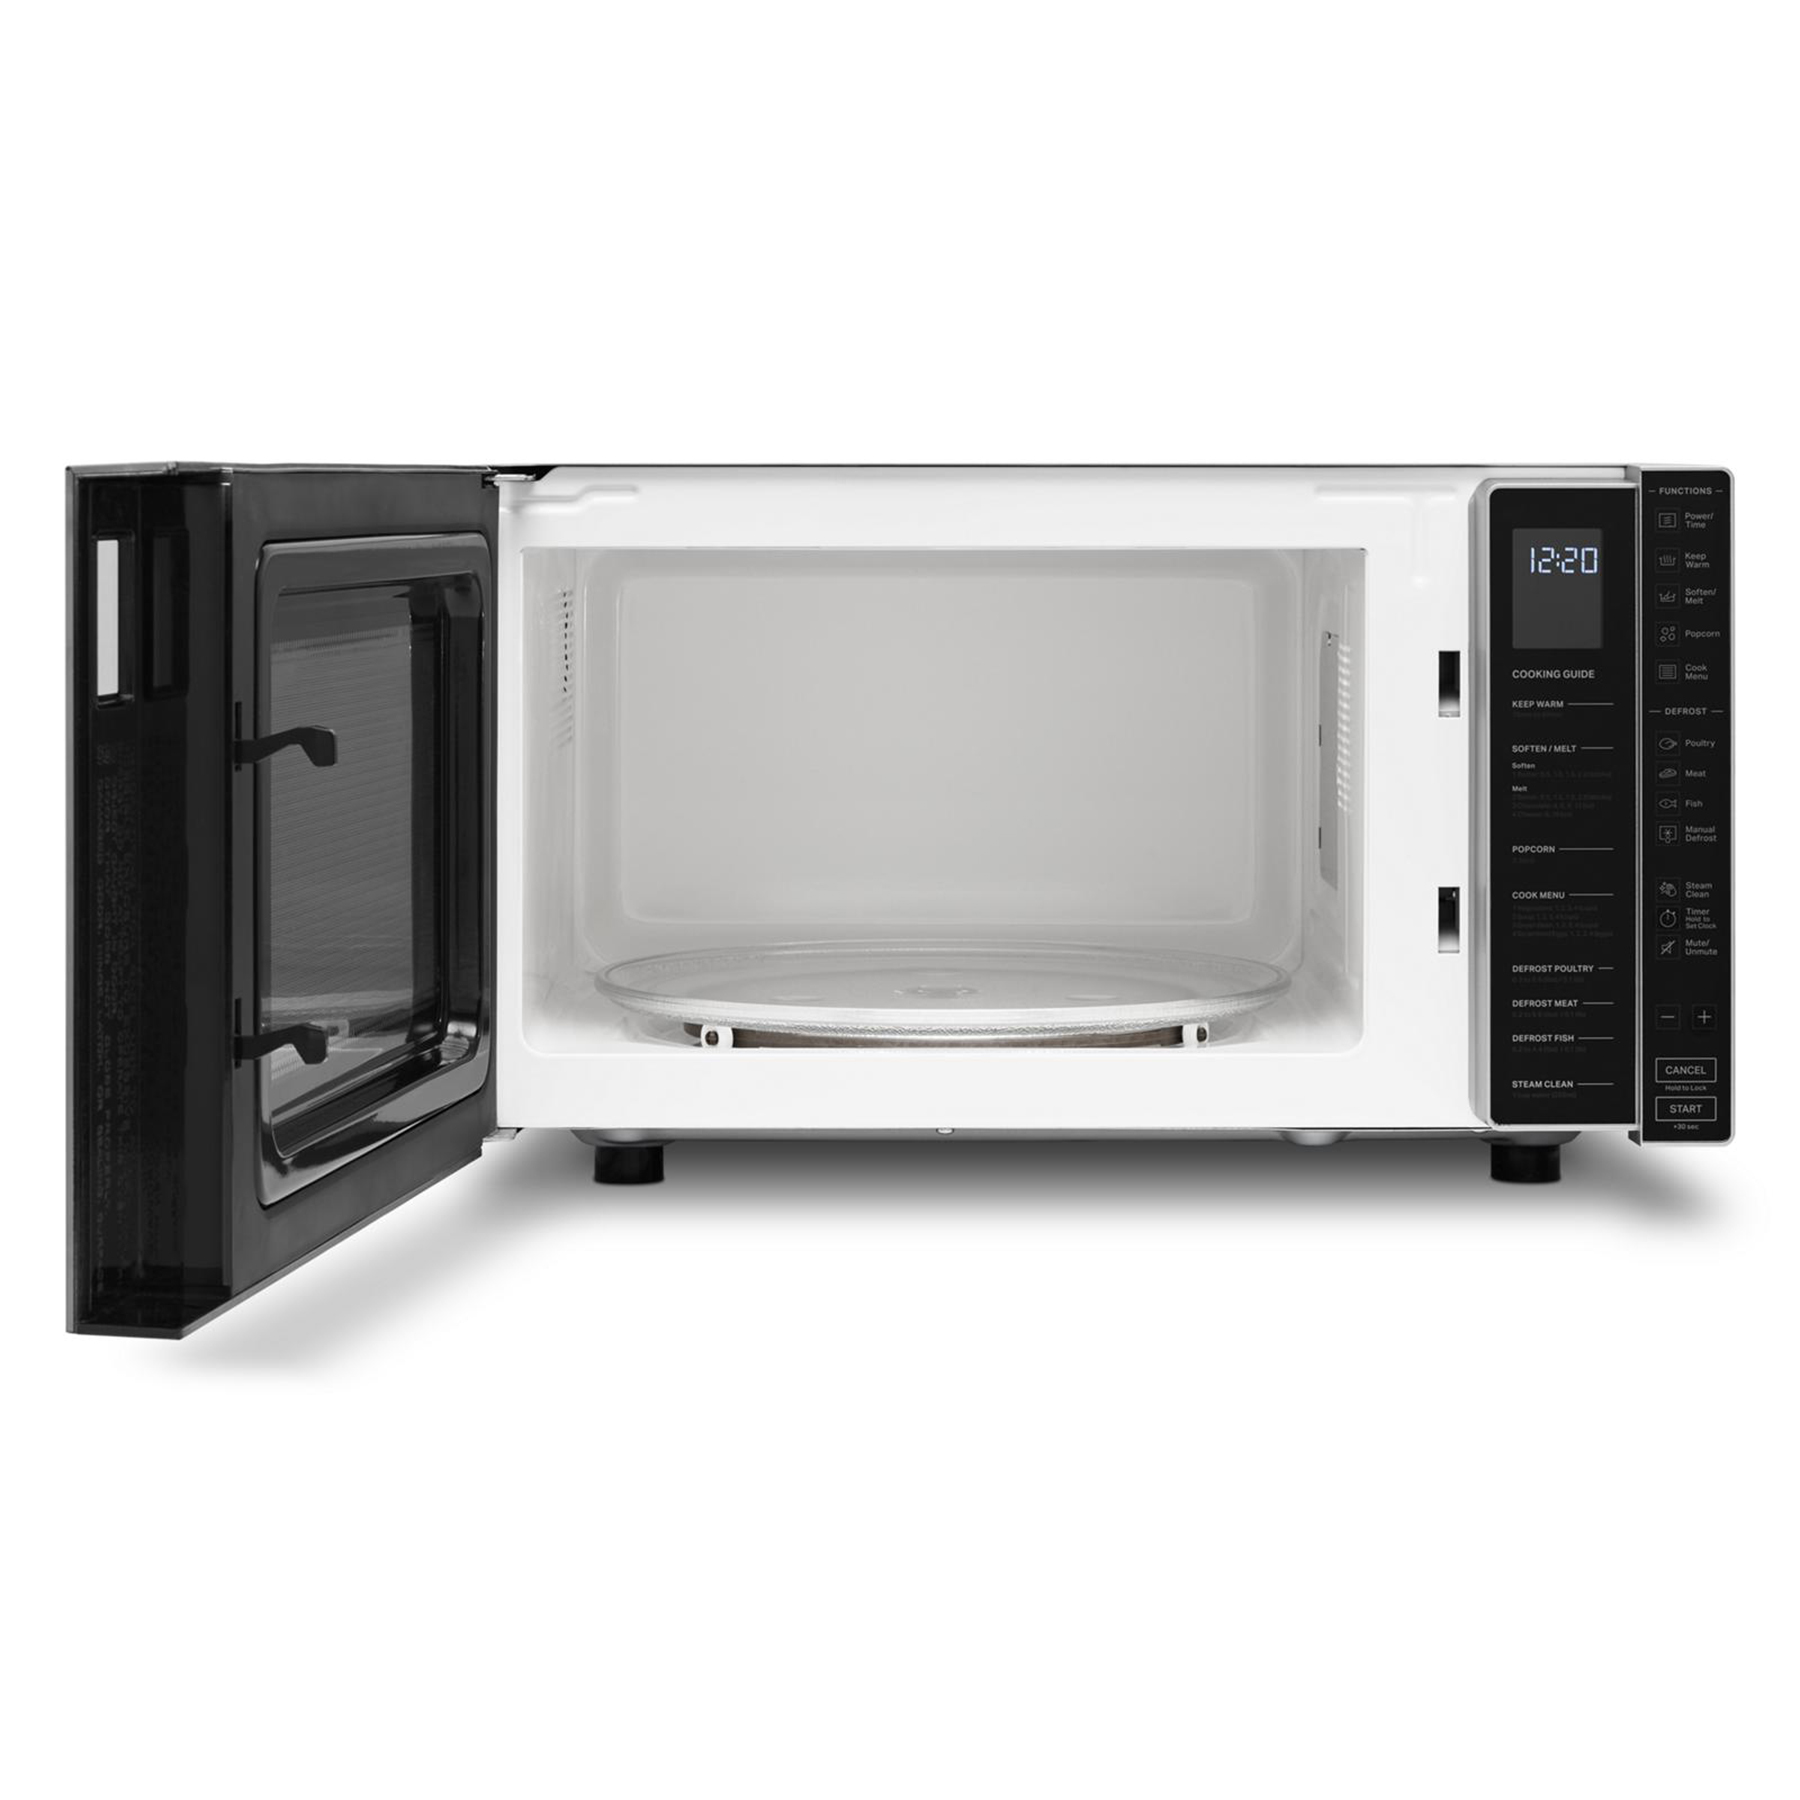 GE 20 in. 1.1 cu.ft Countertop Microwave with 10 Power Levels - White